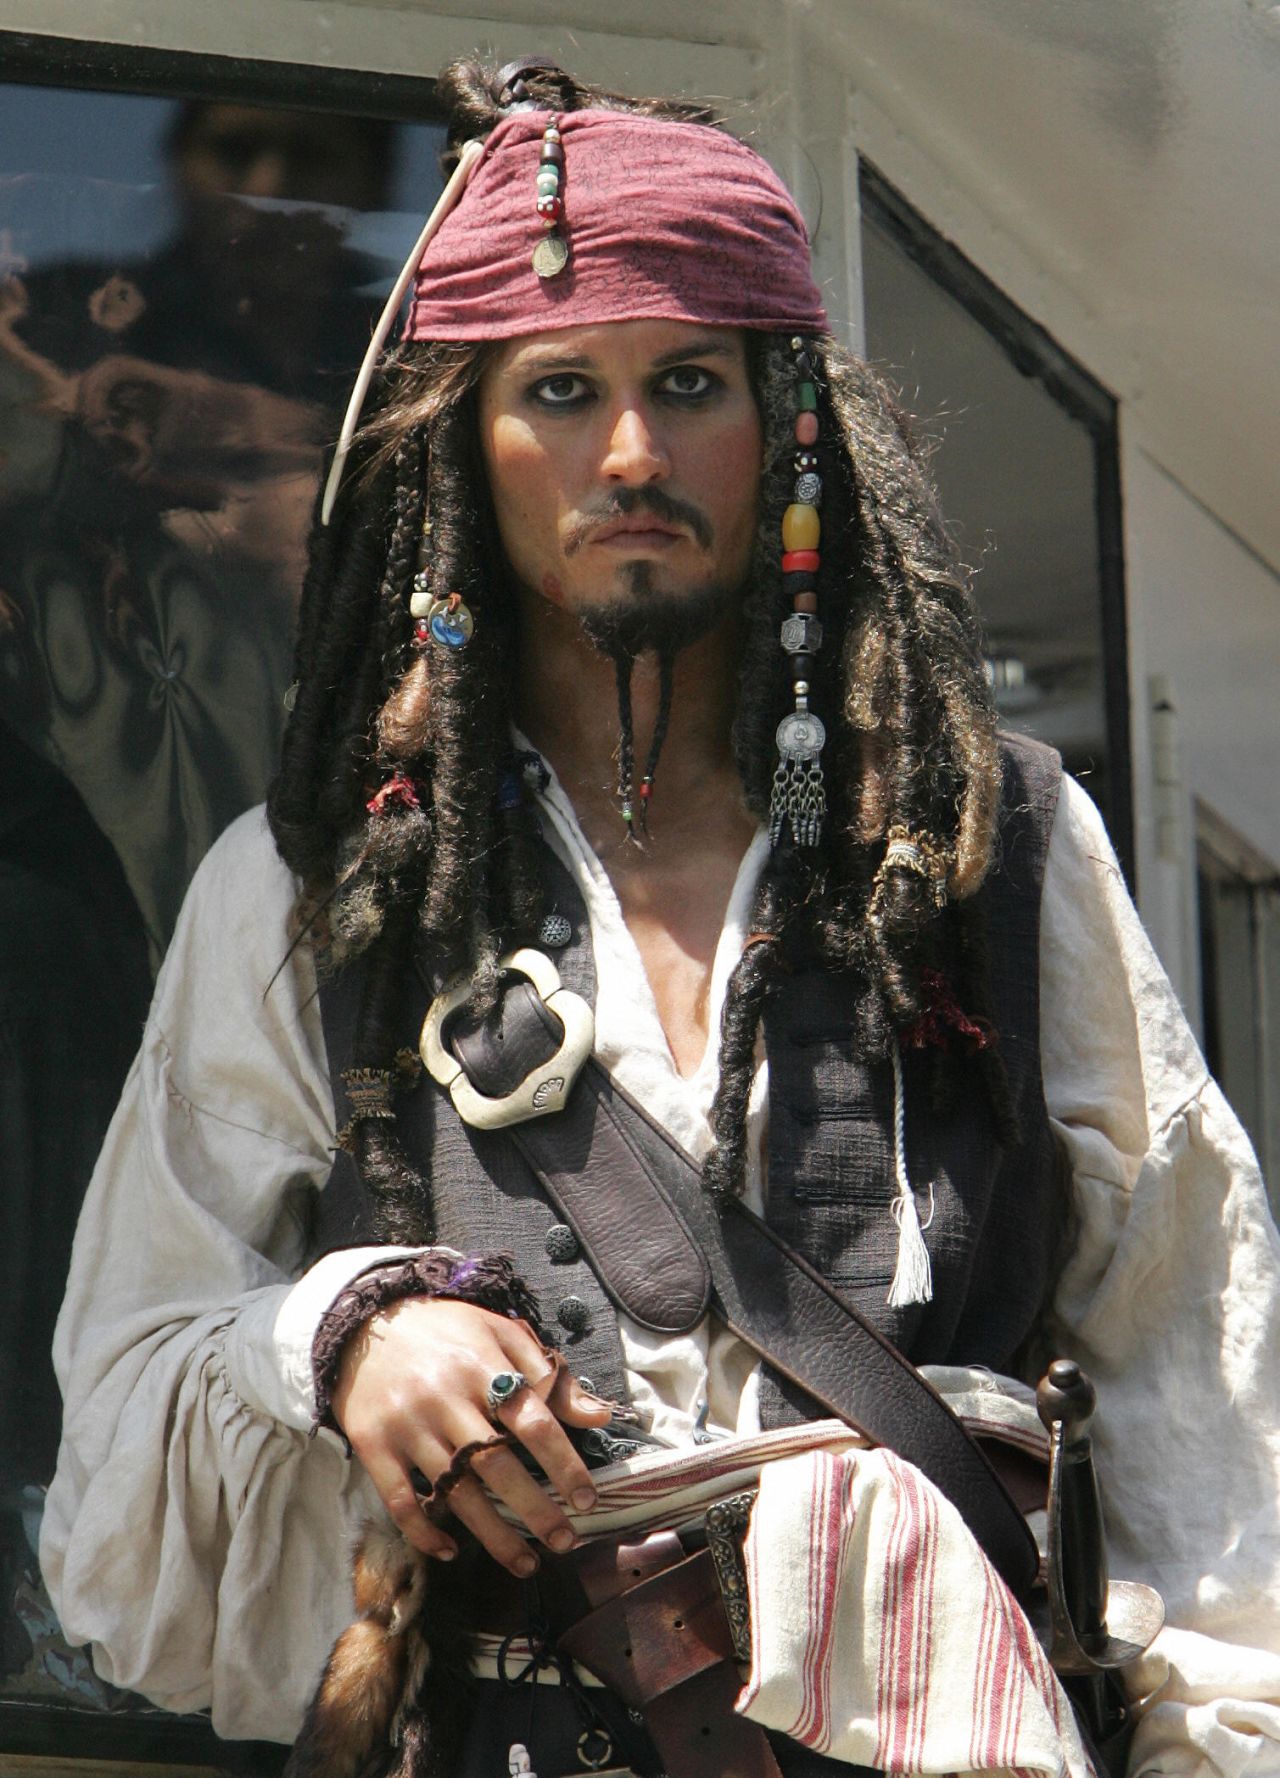 This is actually a wax statue of Johnny Depp portraying Captain Jack Sparrow from Disney's "Pirates of the Caribbean," but you get the point.